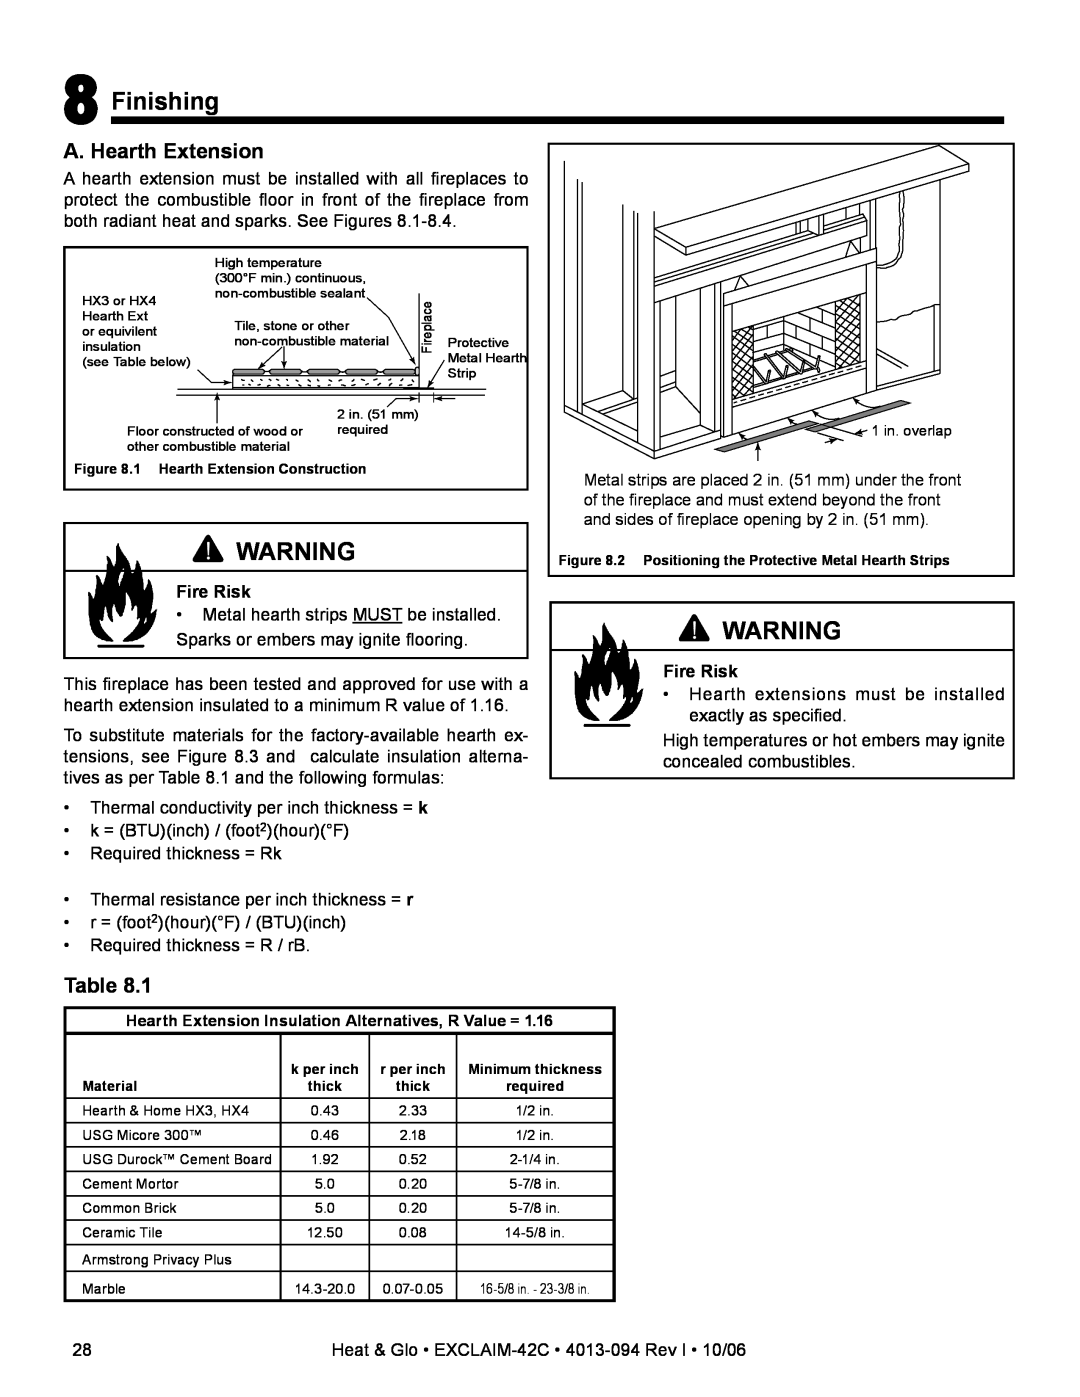 Heat & Glo LifeStyle EXCLAIM-42H-C Finishing, Fire Risk, 1 Hearth Extension Construction, k per inch, r per inch, Material 